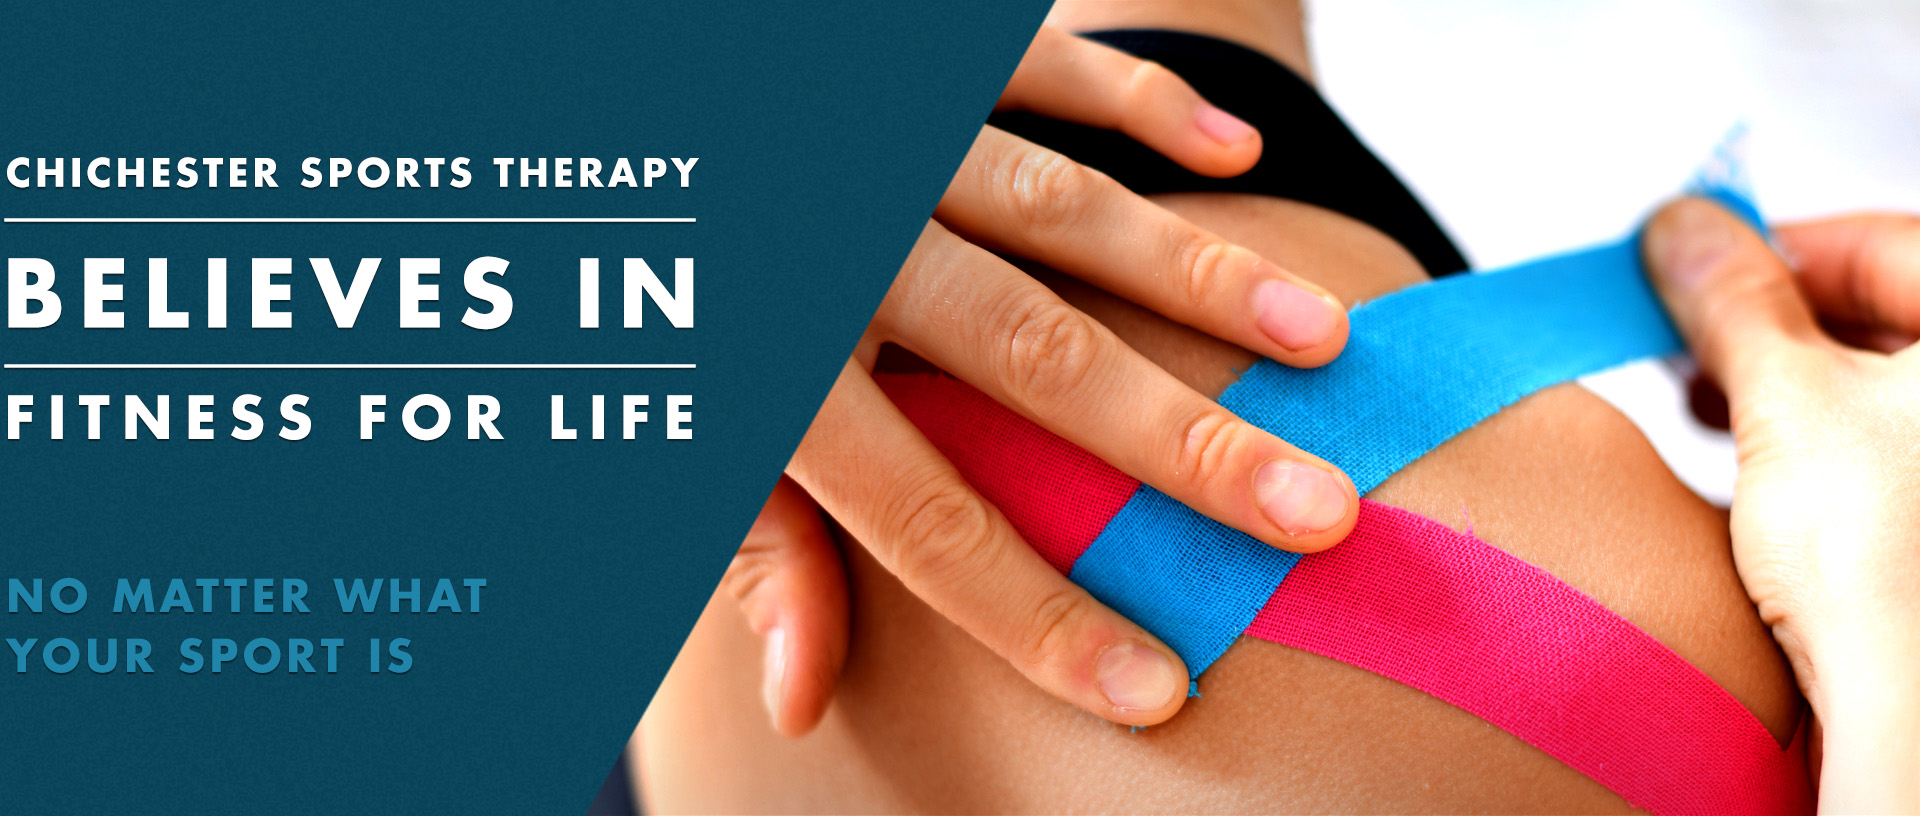 Fitness for Life at Chichester Sports Therapy